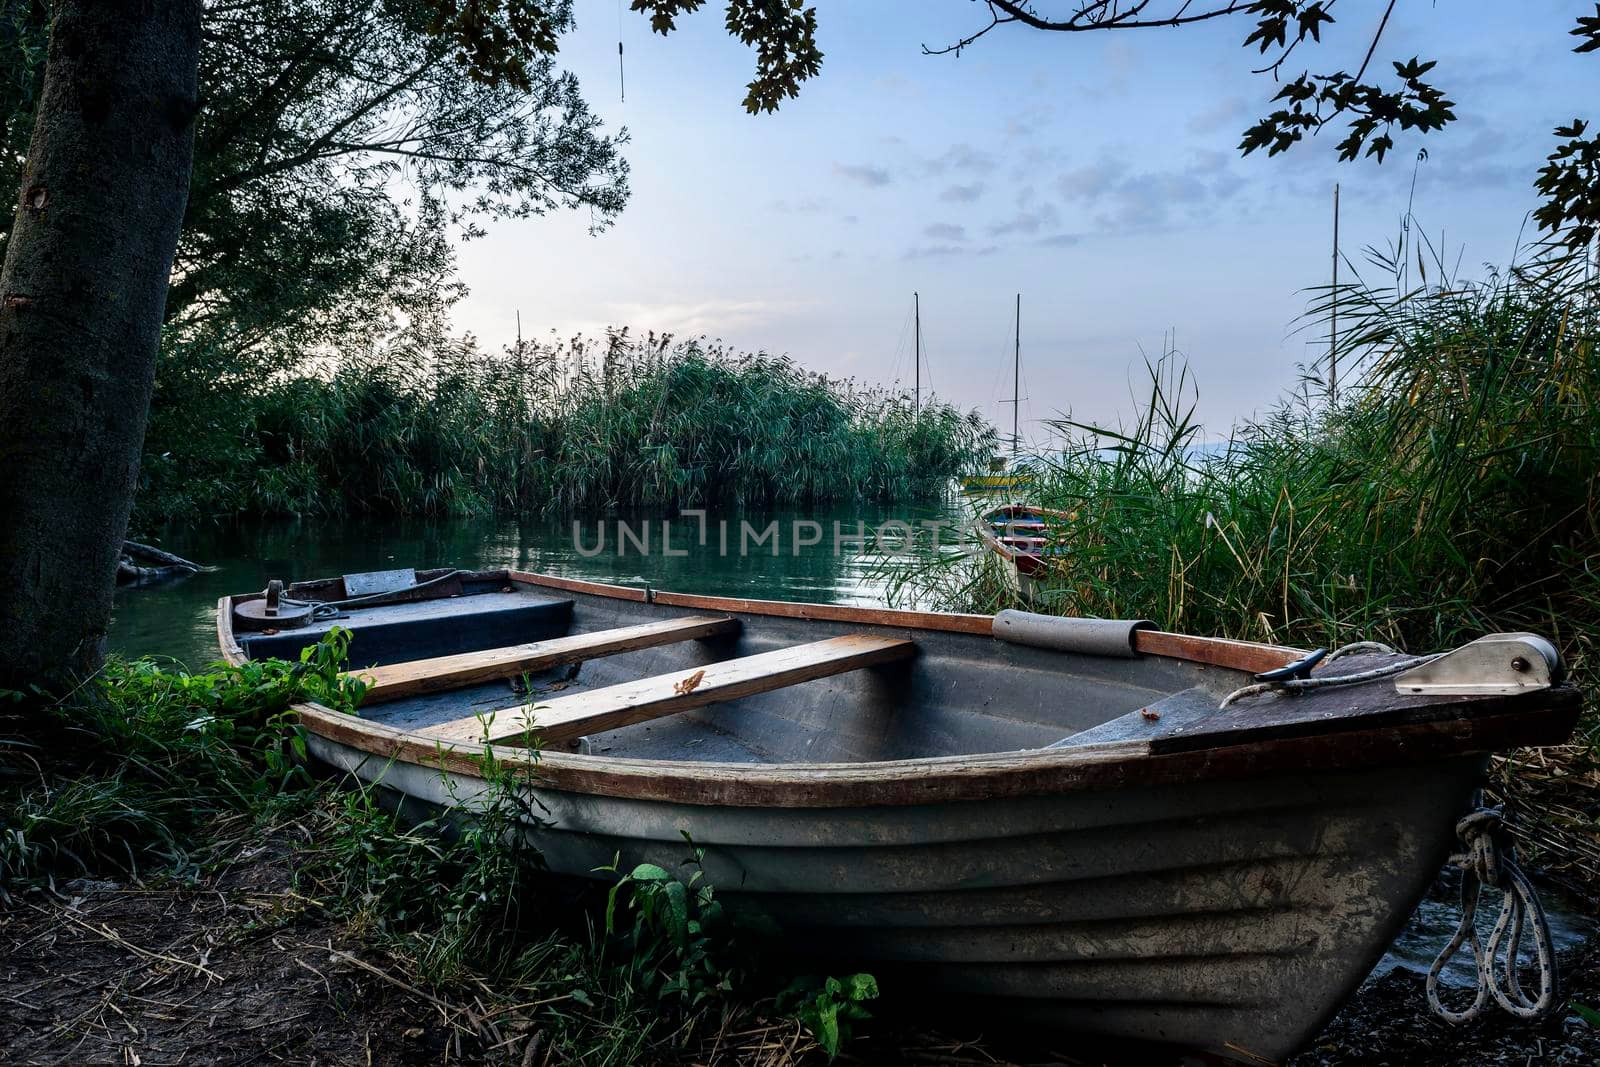 A boat on the lake parked near a tree A dirty boat is parked next to a wooden pier on a quiet lake by isaiphoto